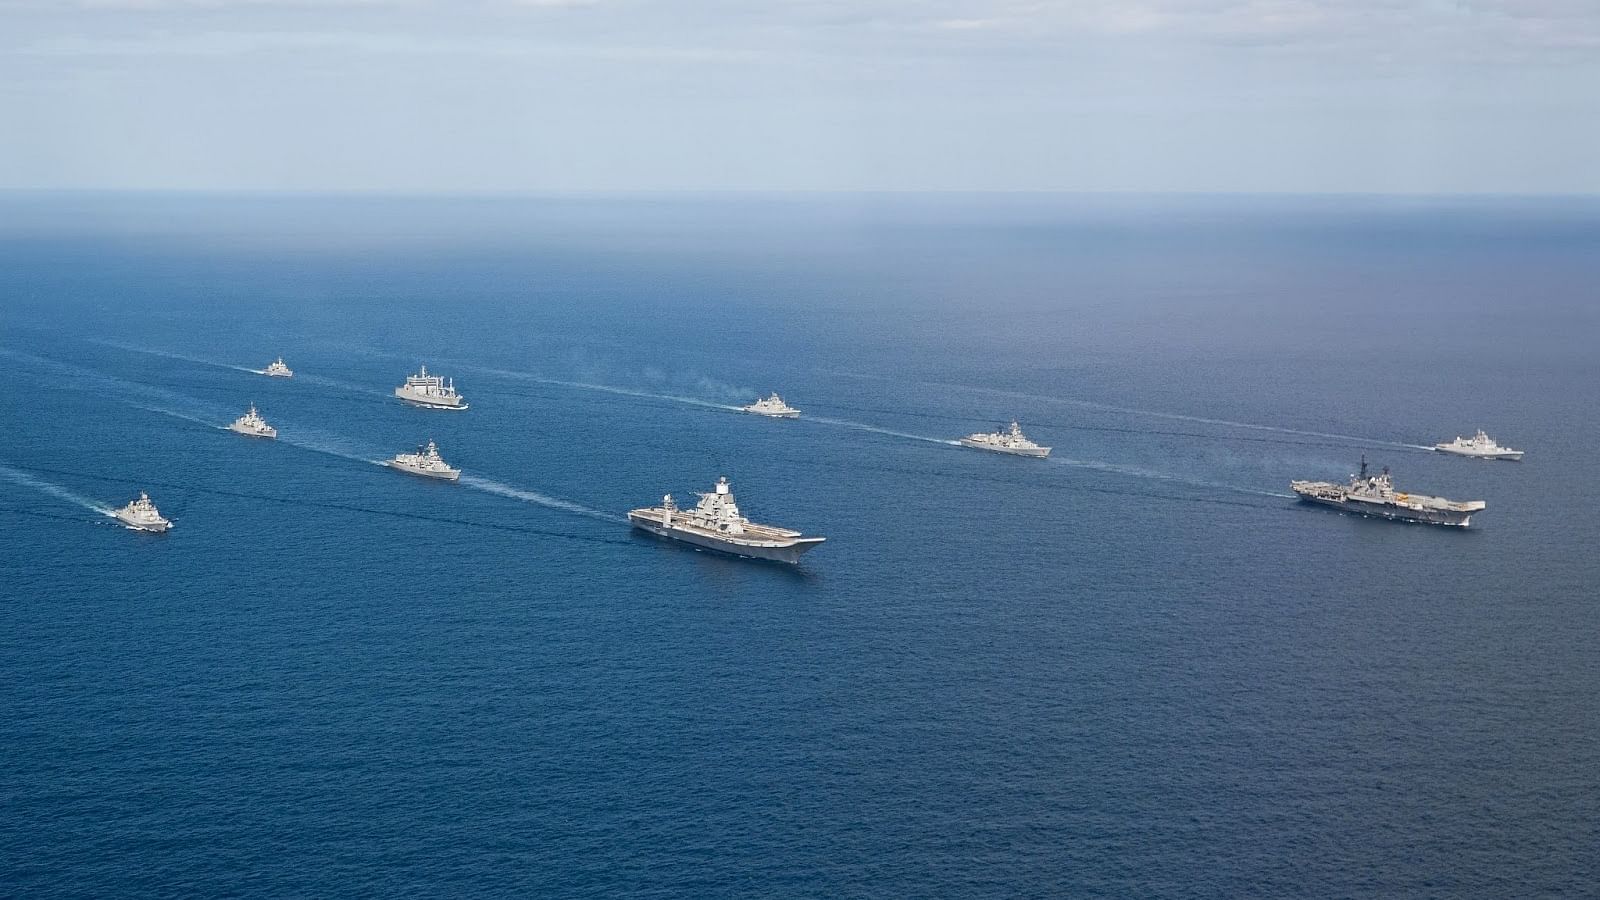 Indian Navy ships at sea. Representational image. (Photo courtesy: <a href="http://www.indiannavy.nic.in/">Indian Navy</a>)